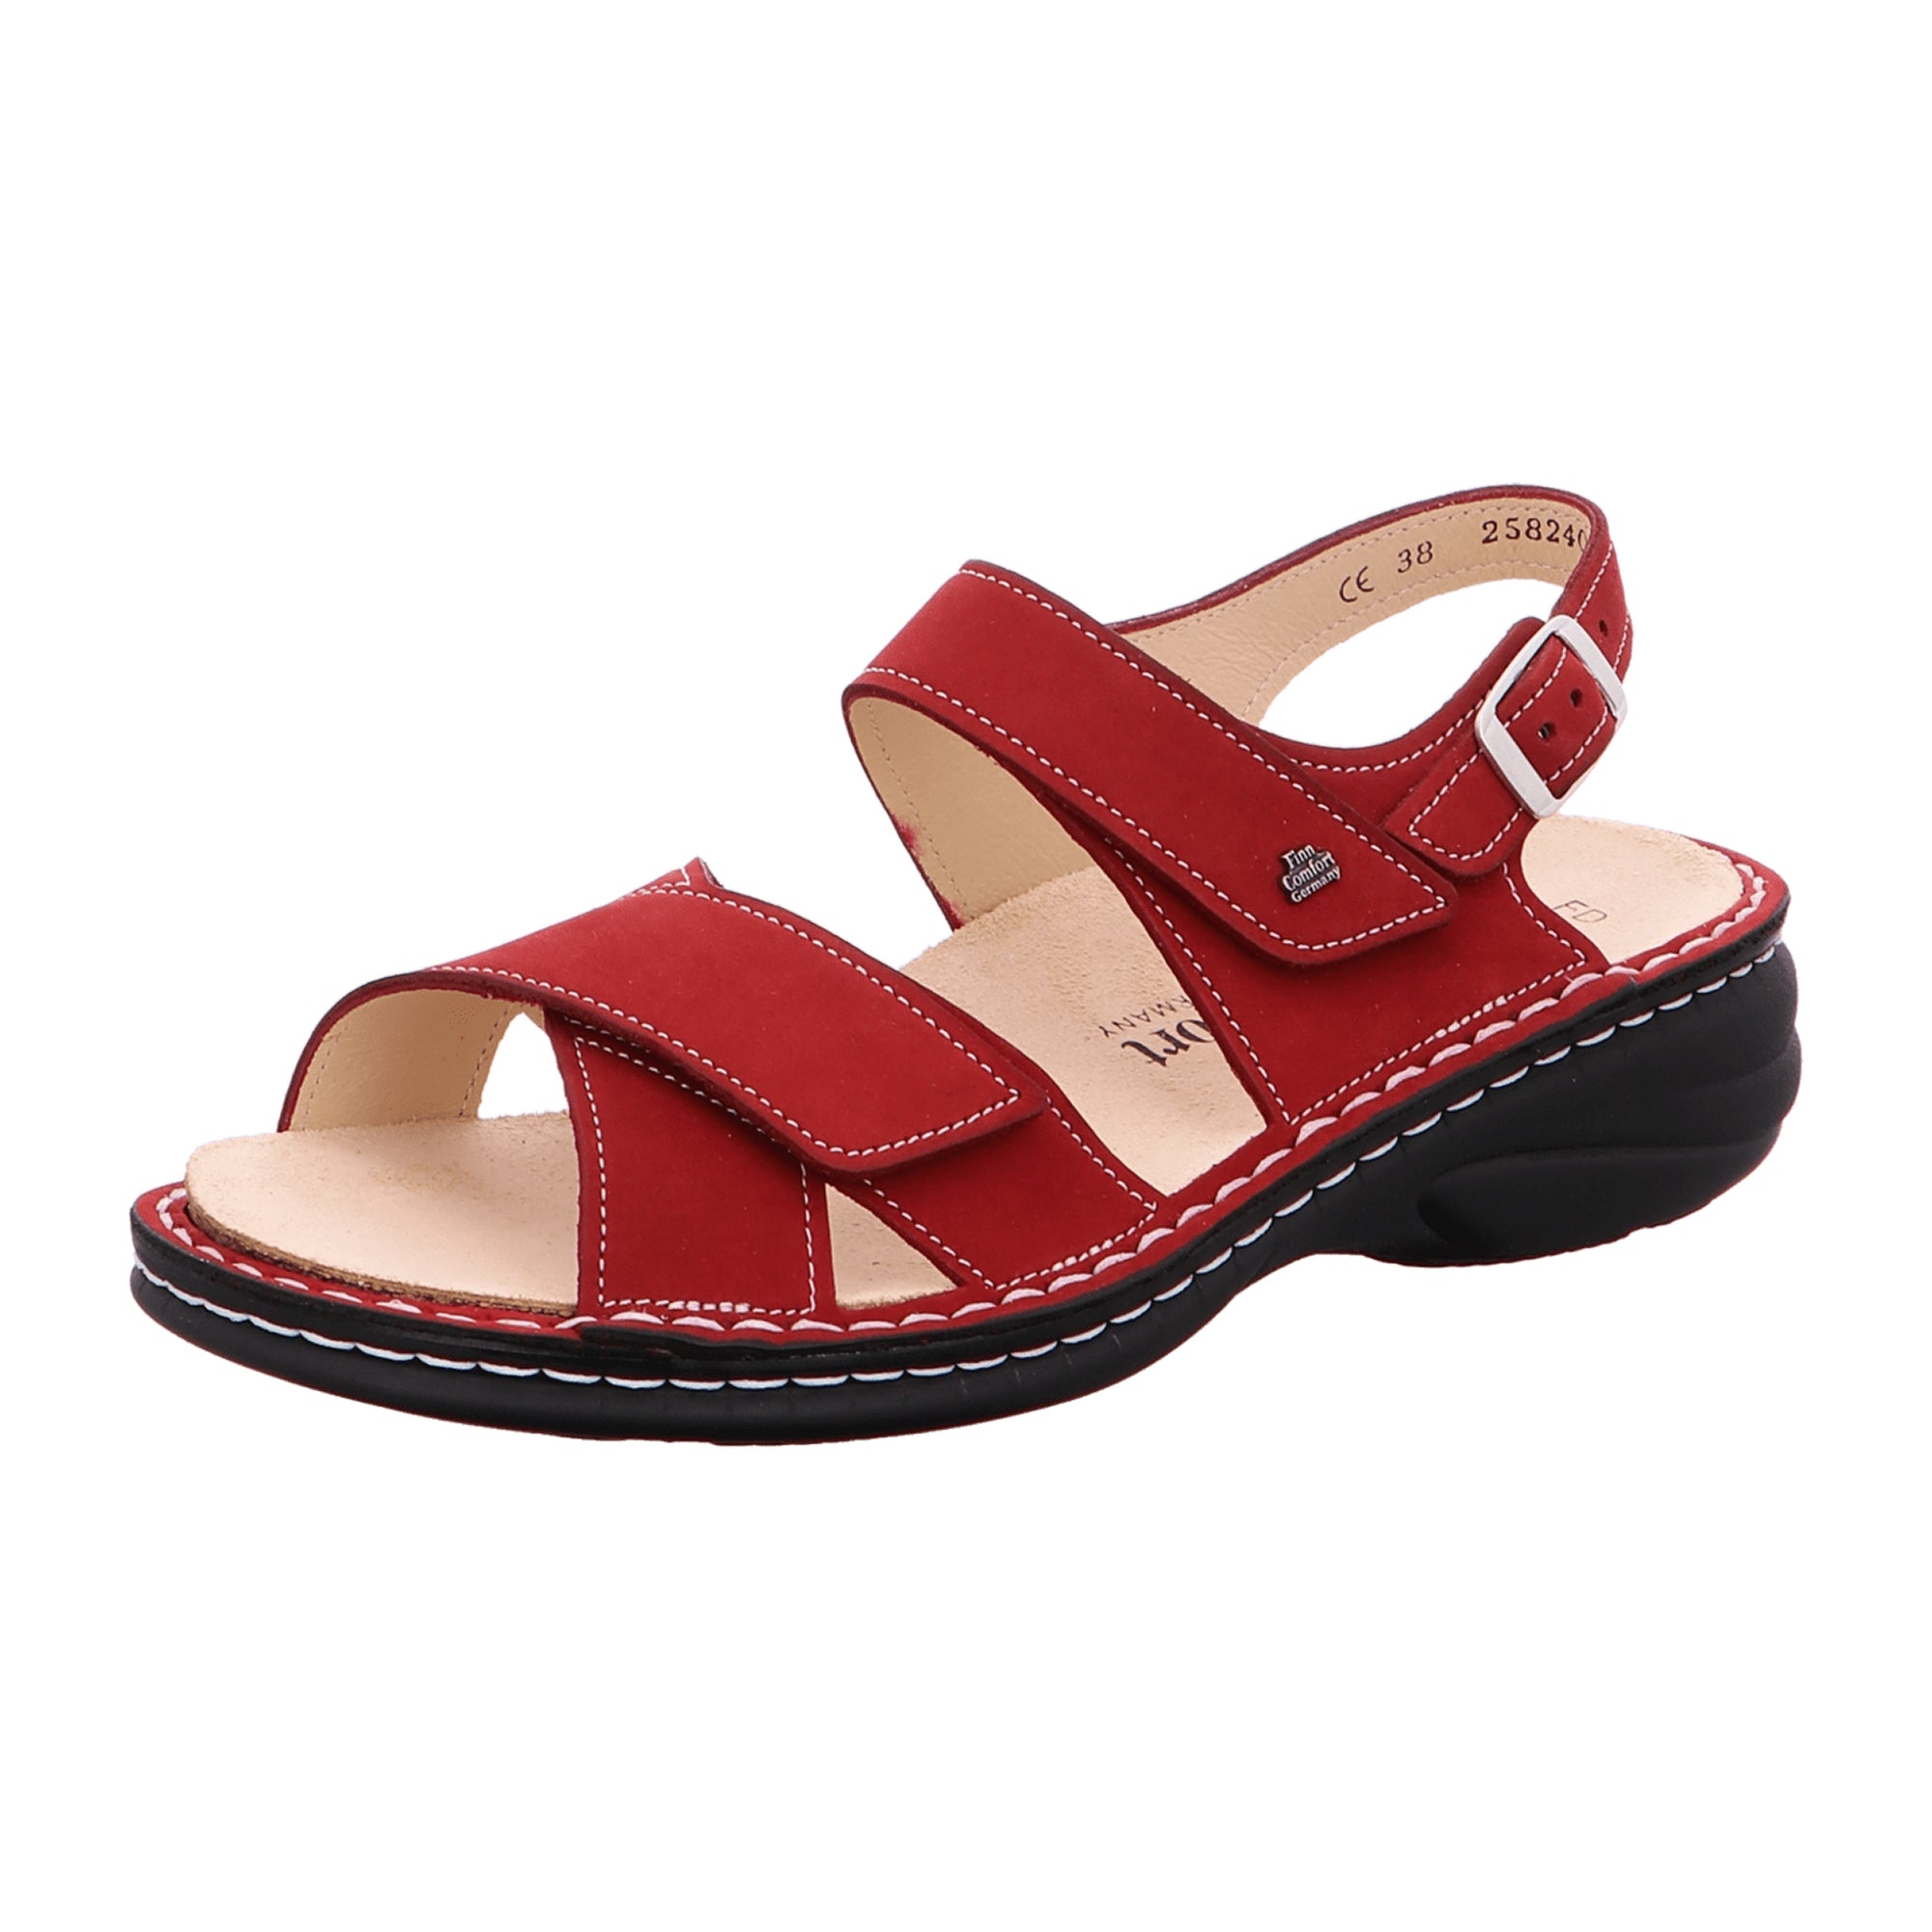 Finn Comfort Linosa Women's Sandals - Chili Red Nubuck Leather with Adjustable Straps and Removable Insoles